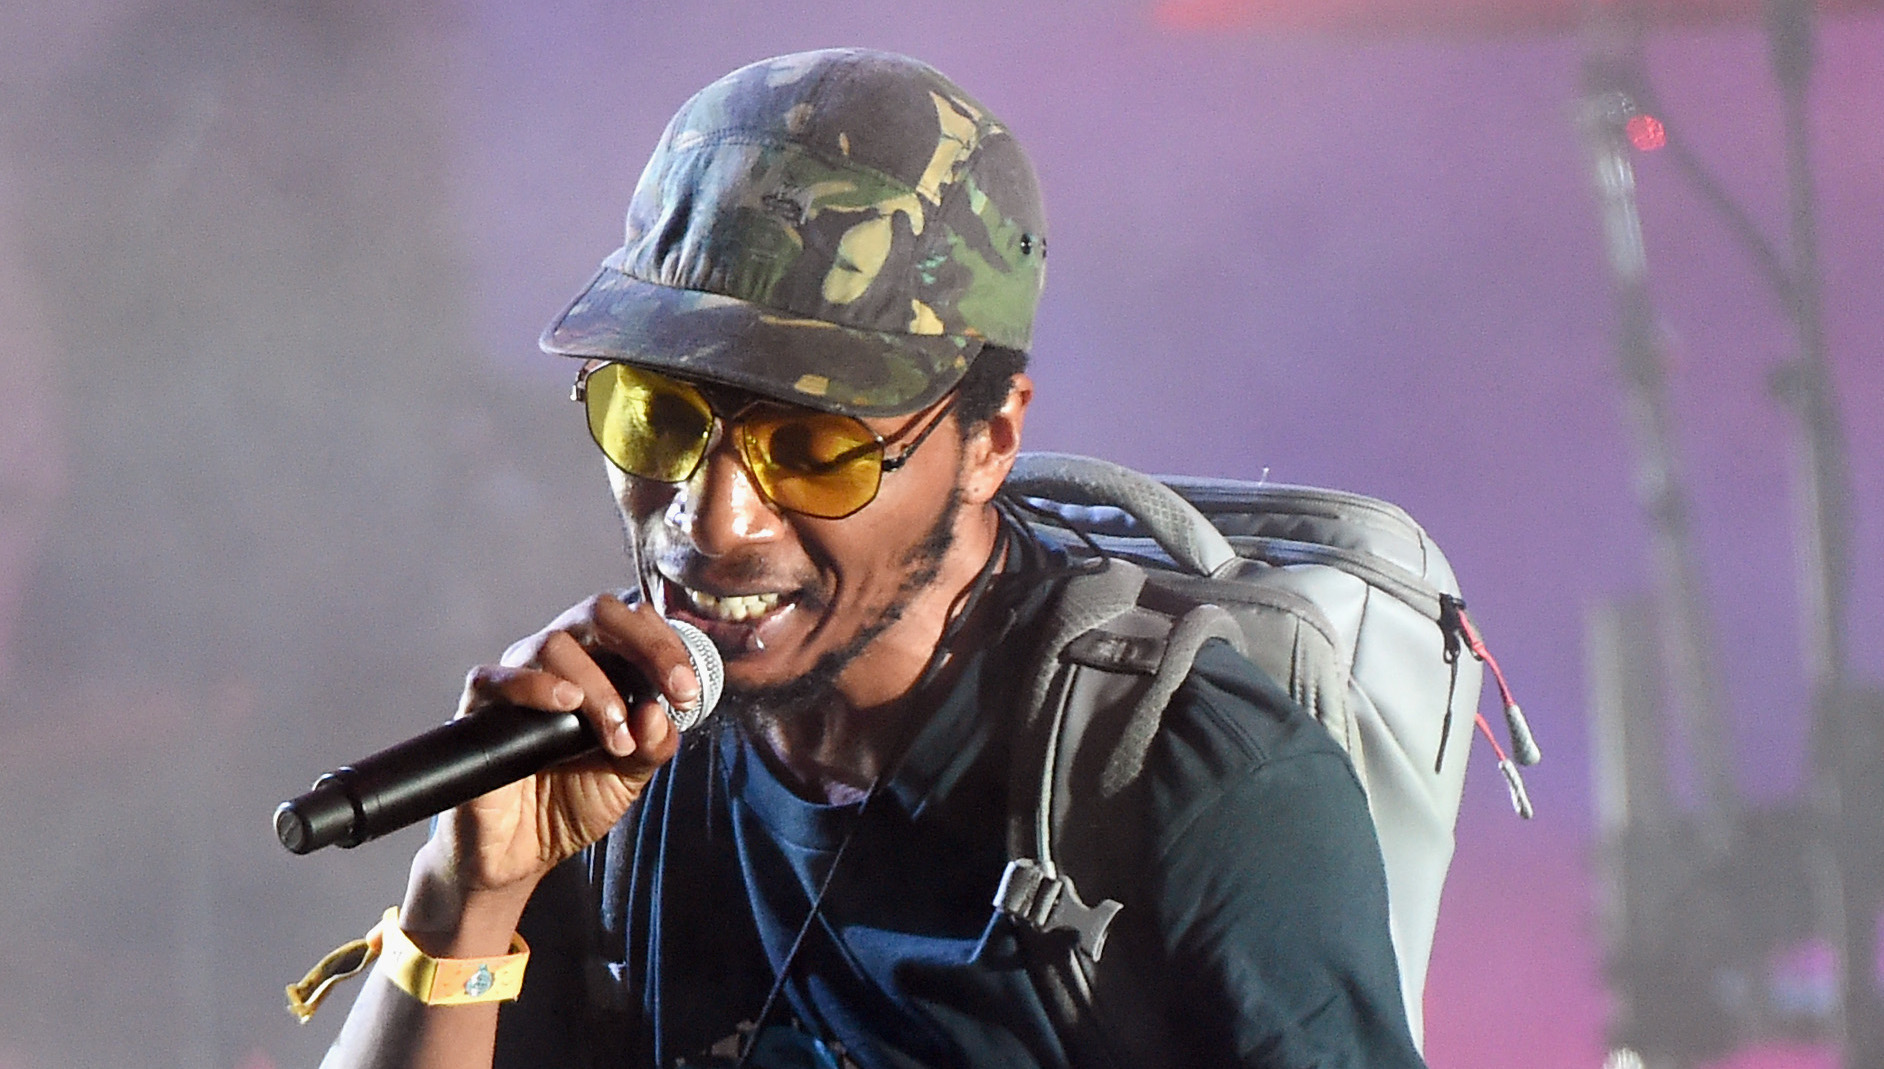 Del The Funky Homosapien Hospitalized After Falling Offstage at Gorillaz Show in Denmark